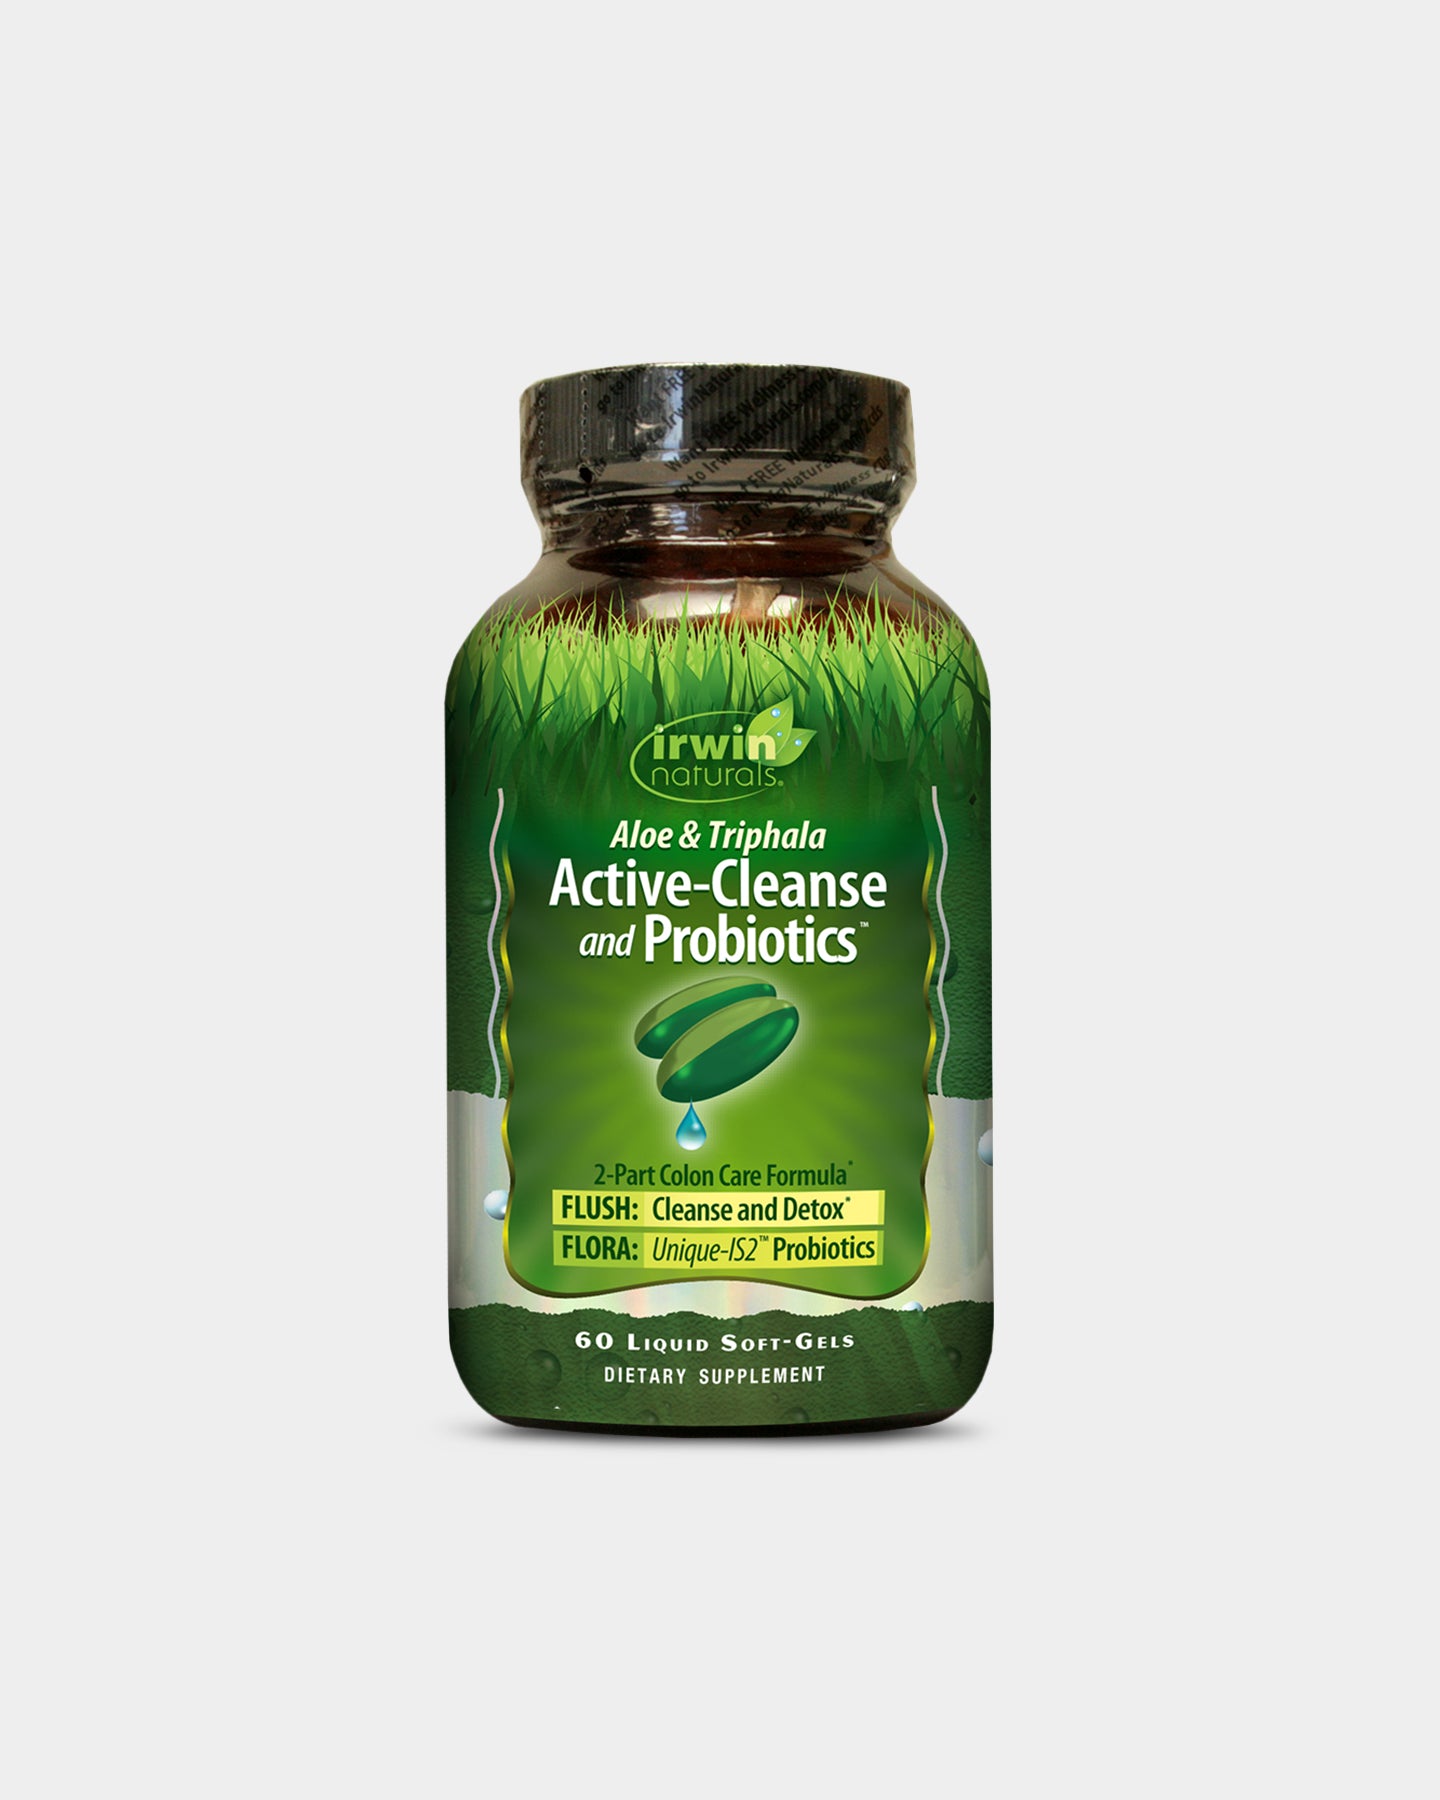 Image of Irwin Naturals Active-Cleanse and Probiotics